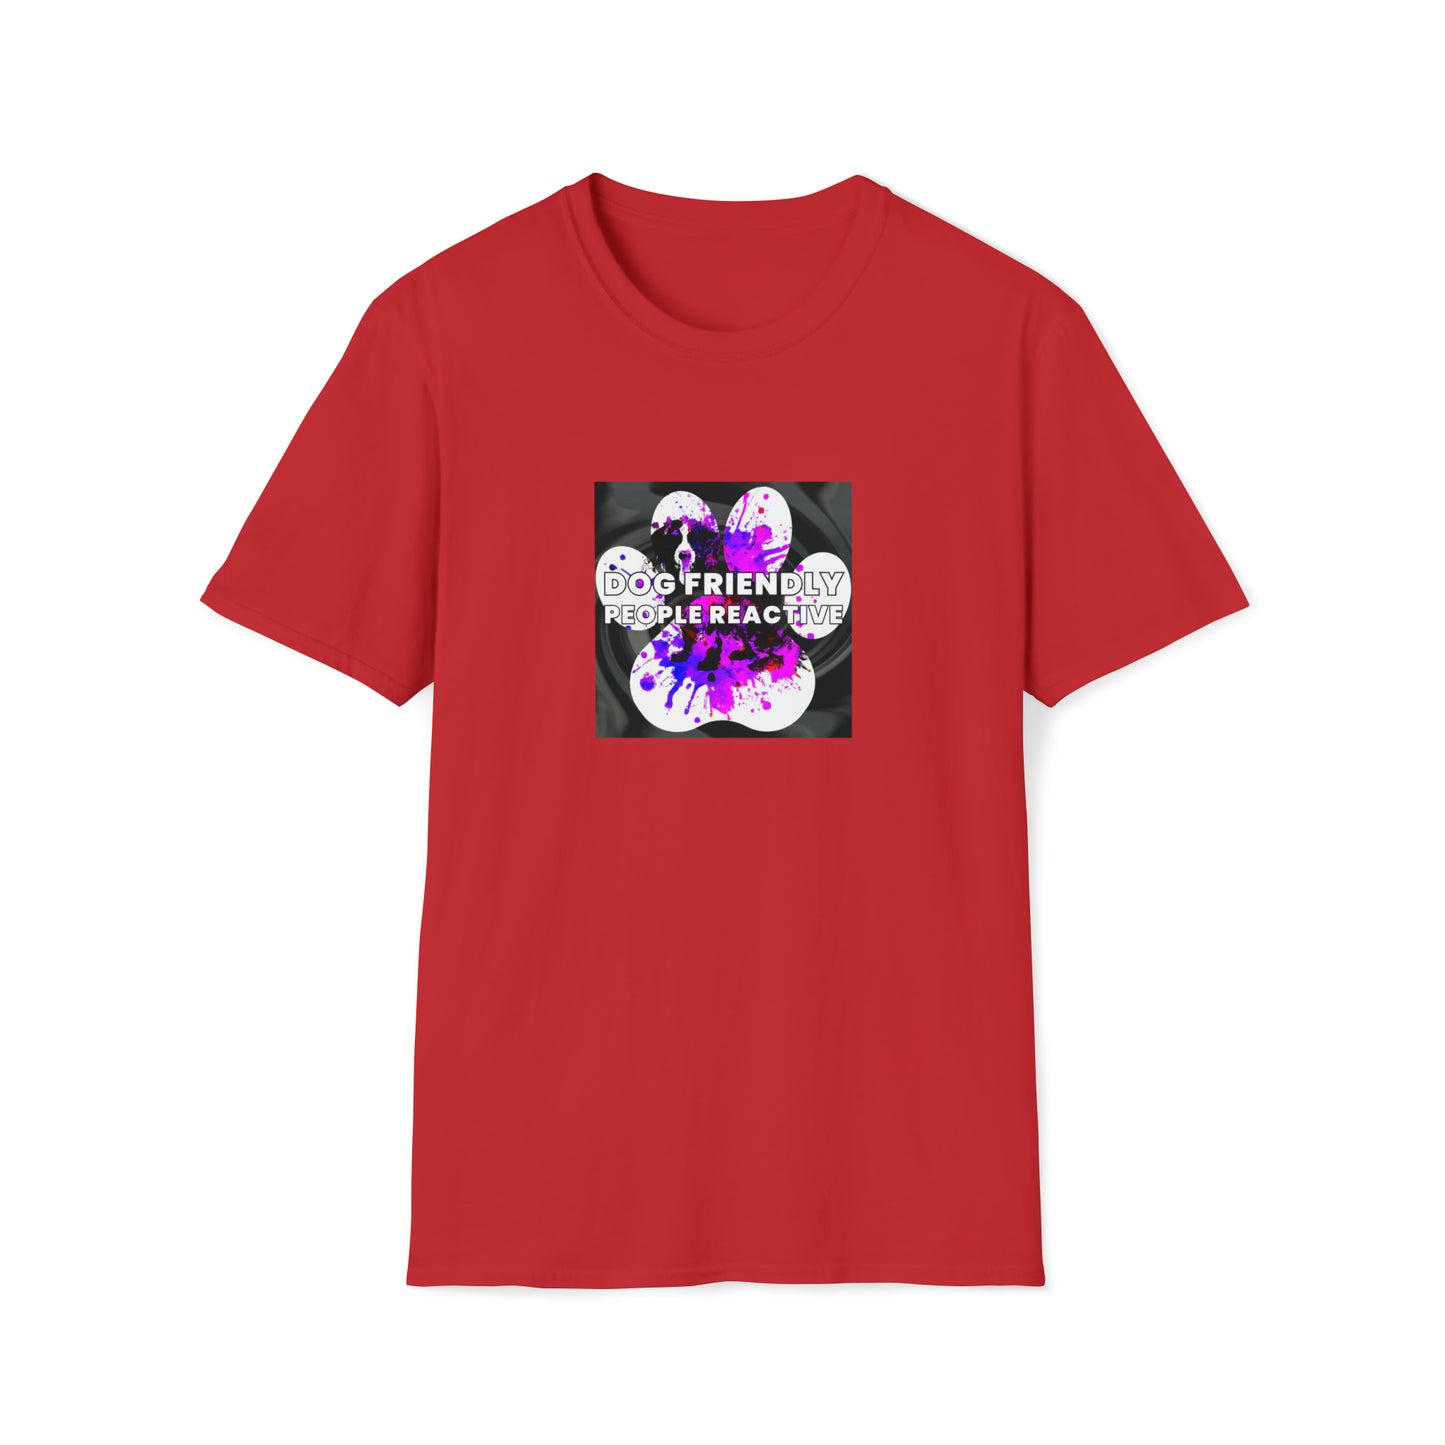 90's Street Swag Designer - "Girly G's Glam Swagg" - "Dog Friendly, People Reactive" Unisex Tee